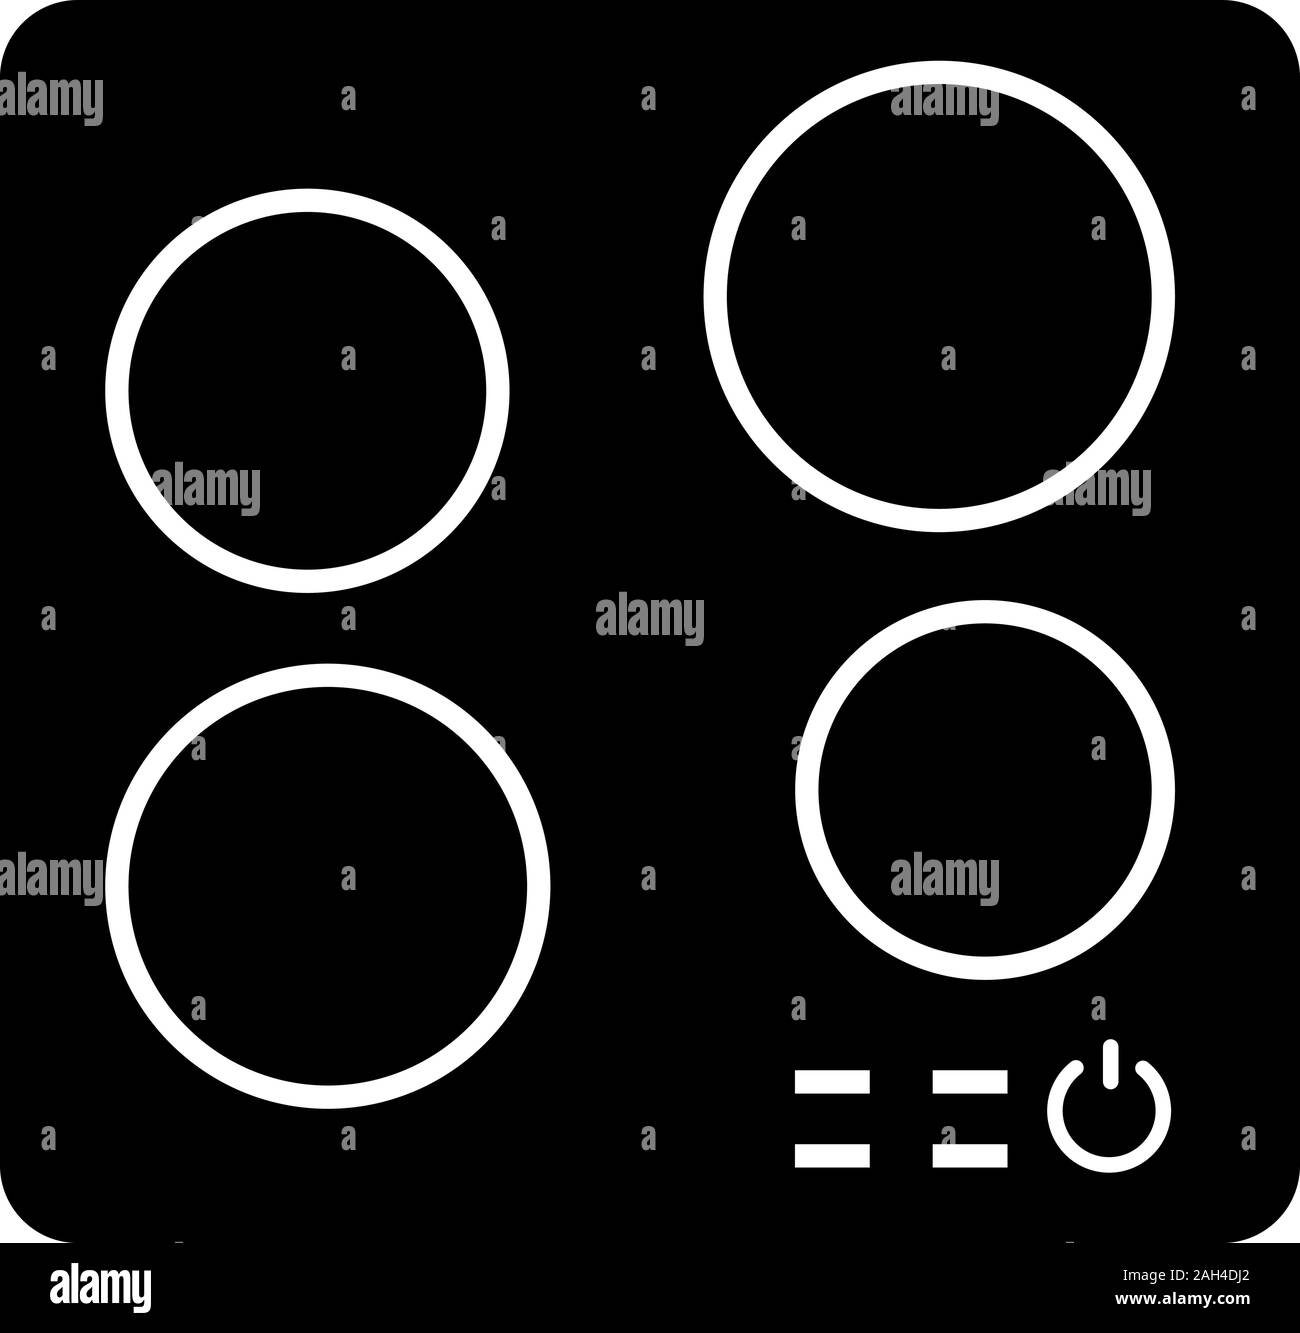 Electric induction hob glyph icon. Cooktop. Cooking panel, surface. Induction stove or built in cooker. Modern kitchen appliance. Silhouette symbol. N Stock Vector